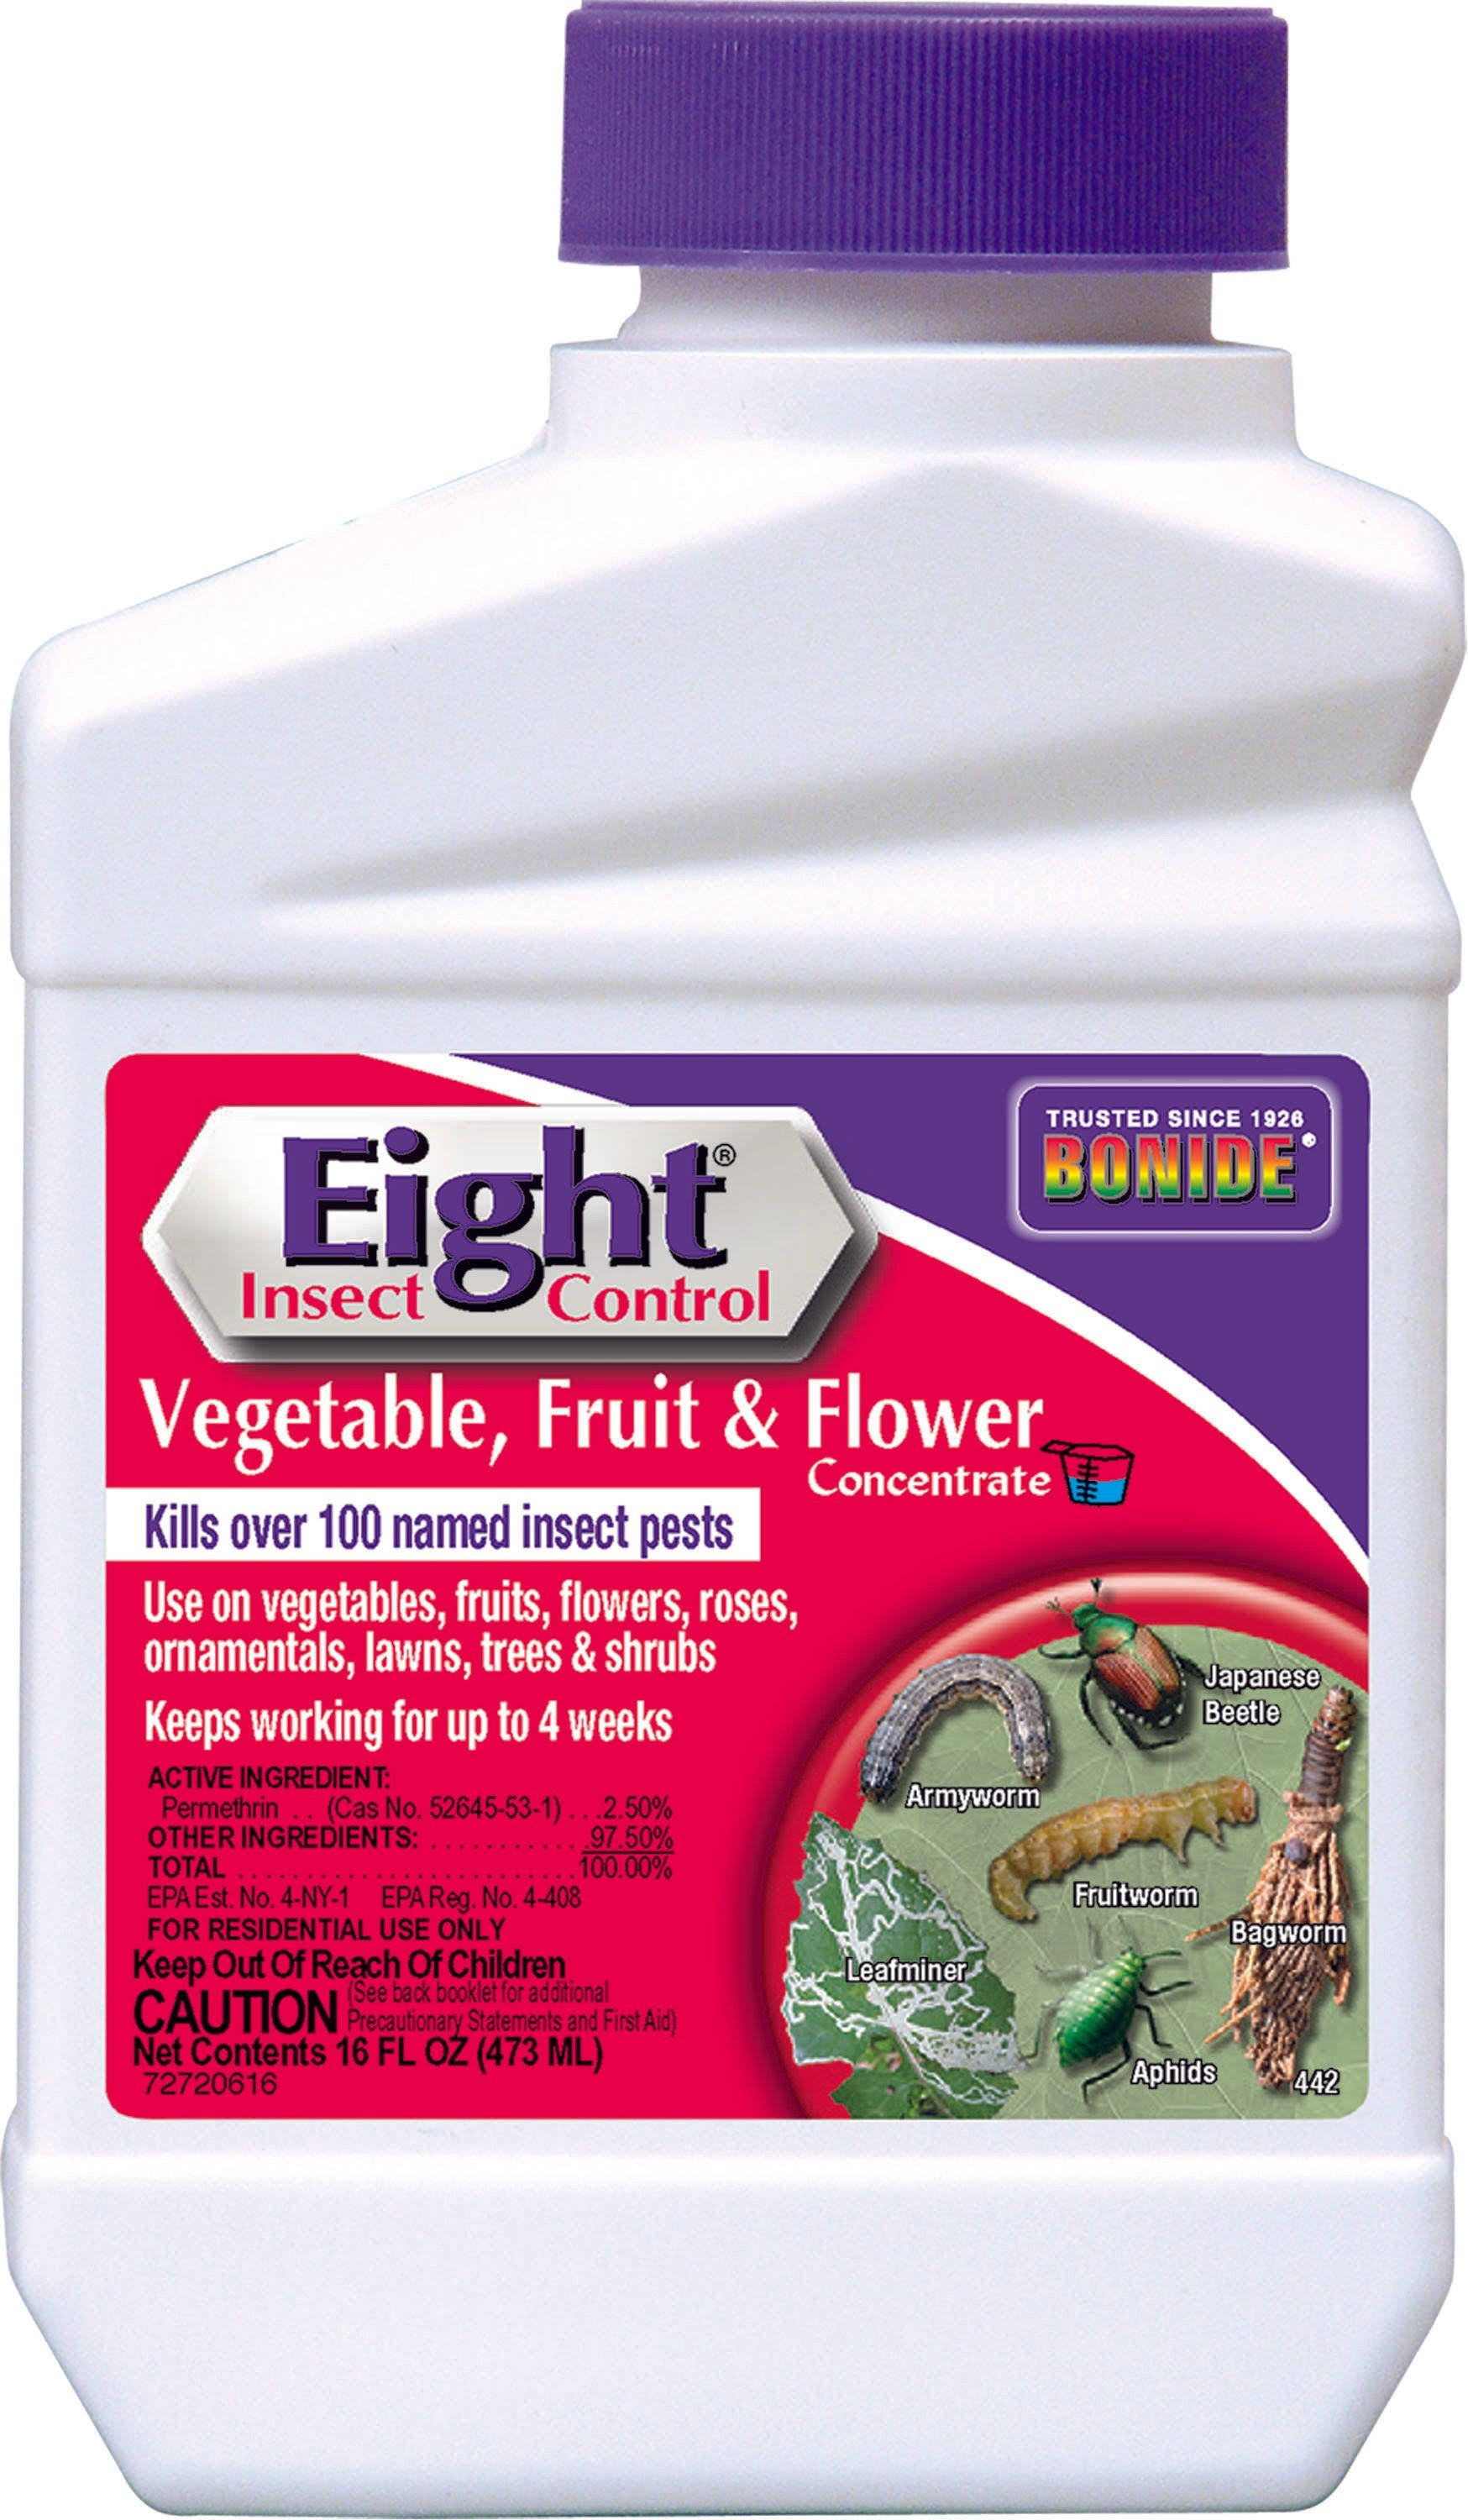 Bonide Products 442 Eight Insect Control